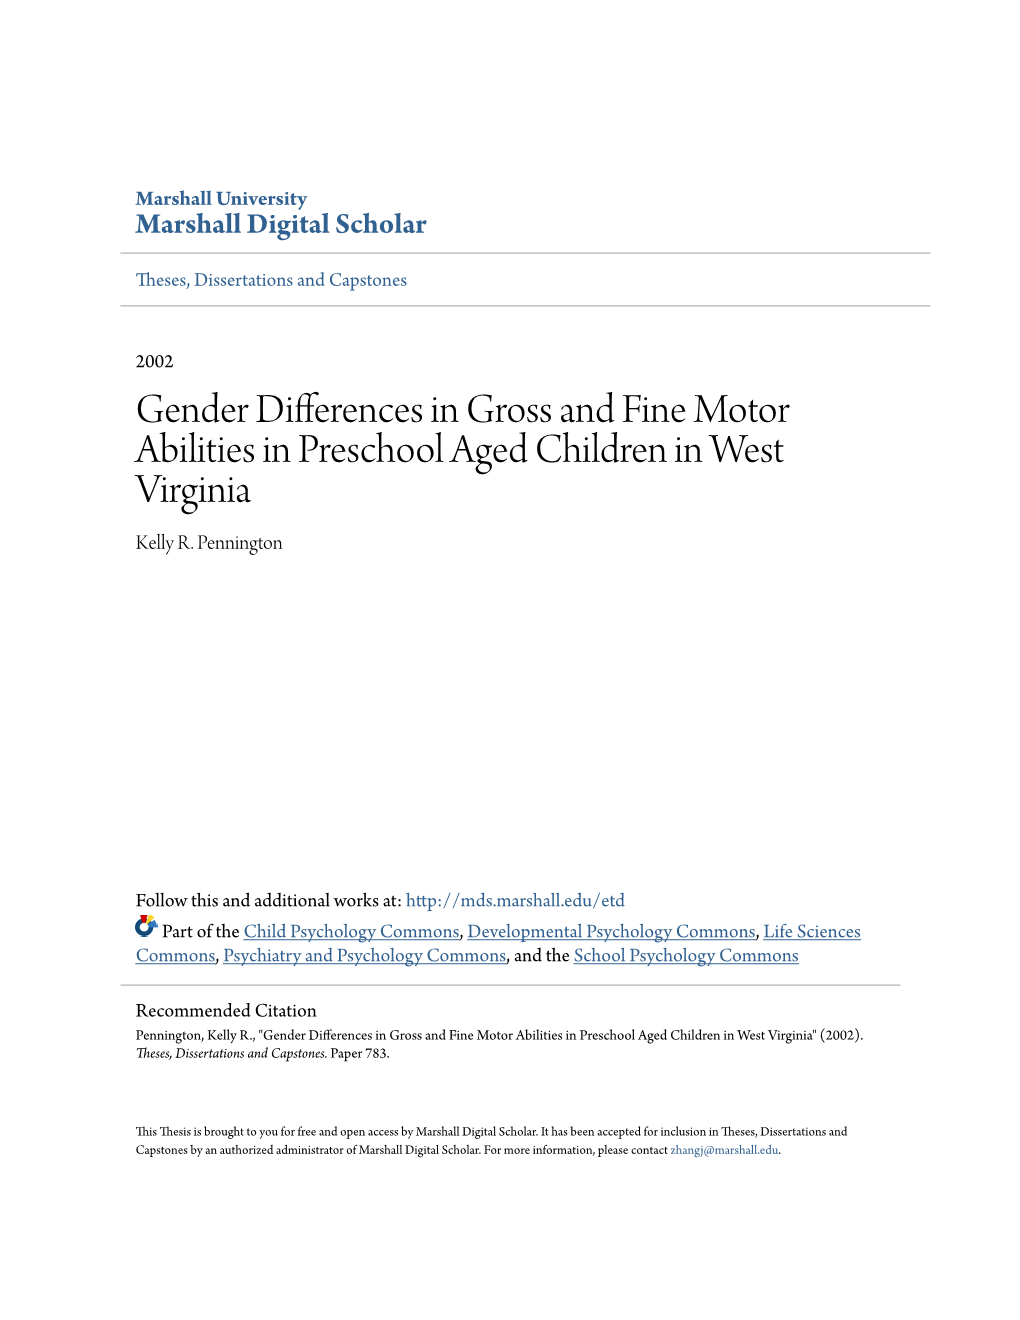 Gender Differences in Gross and Fine Motor Abilities in Preschool Aged Children in West Virginia Kelly R